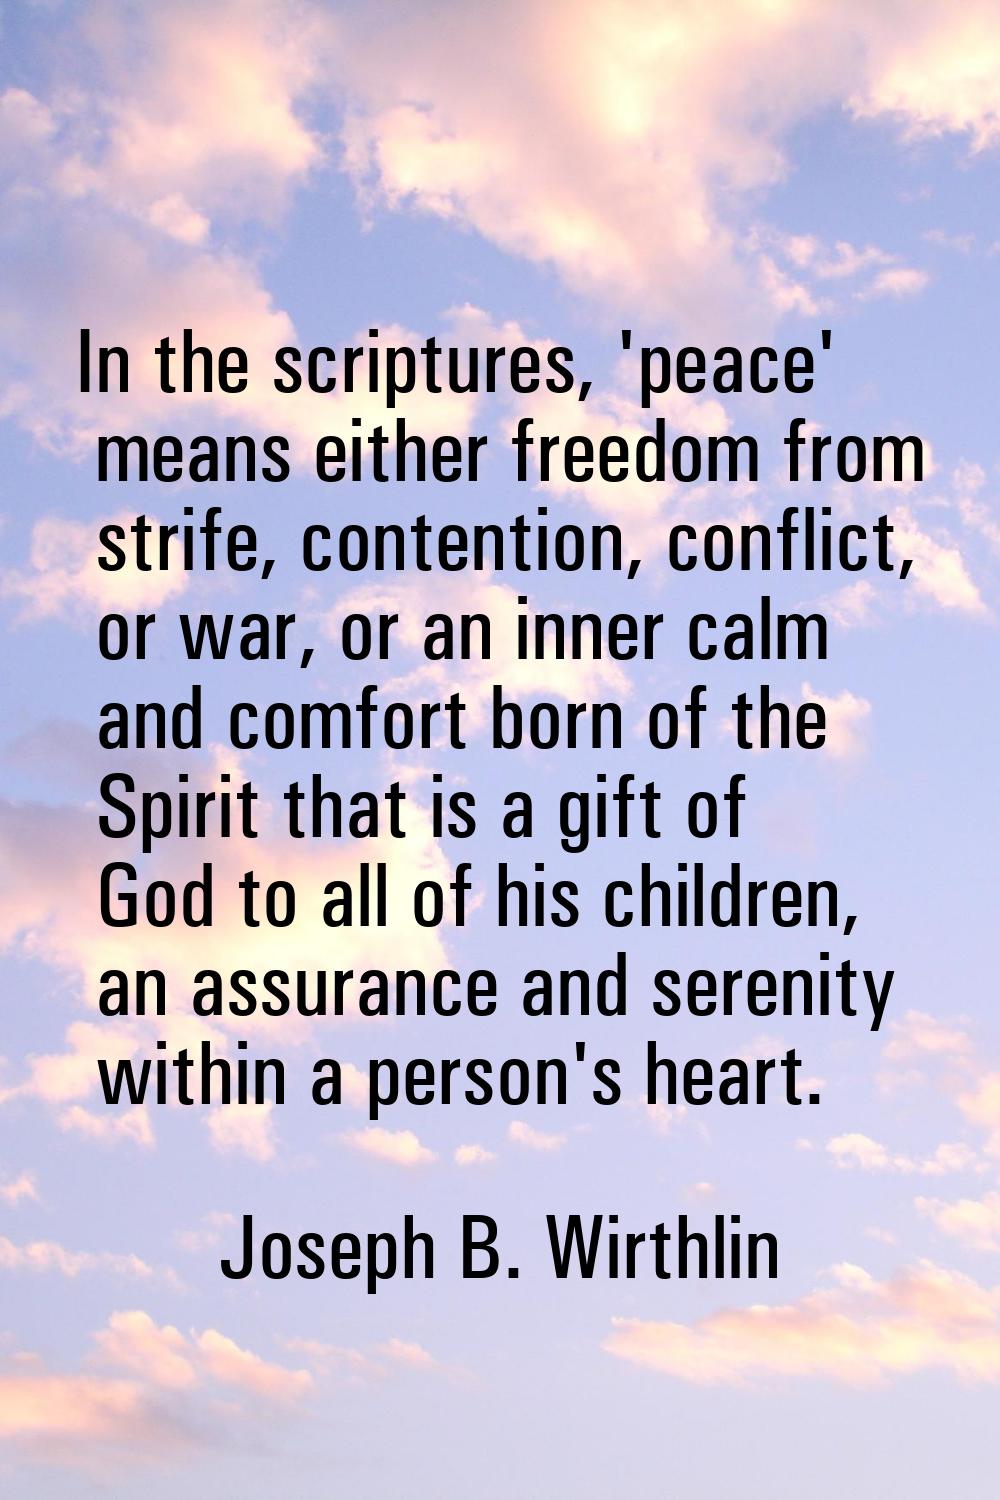 In the scriptures, 'peace' means either freedom from strife, contention, conflict, or war, or an in